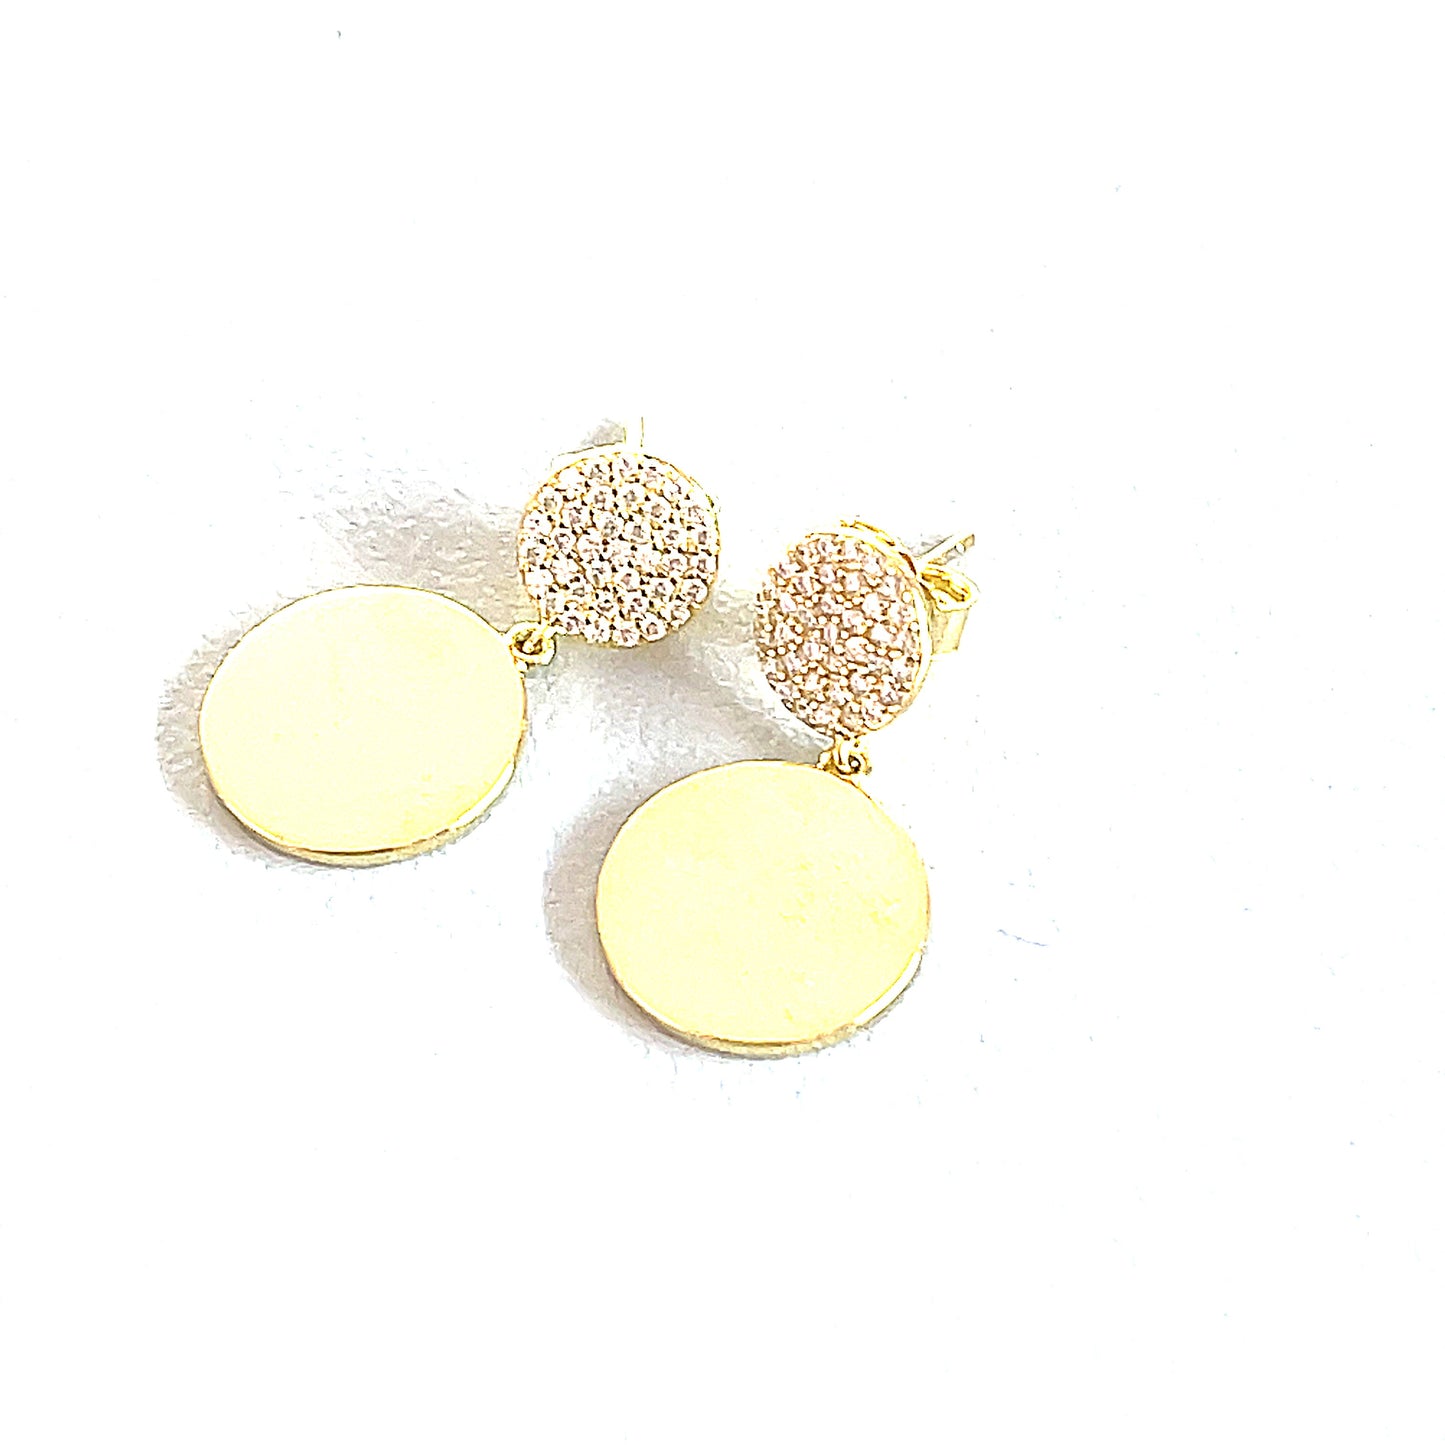 Sterling Silver Pave' Stud with Dangling Round Disc Earrings